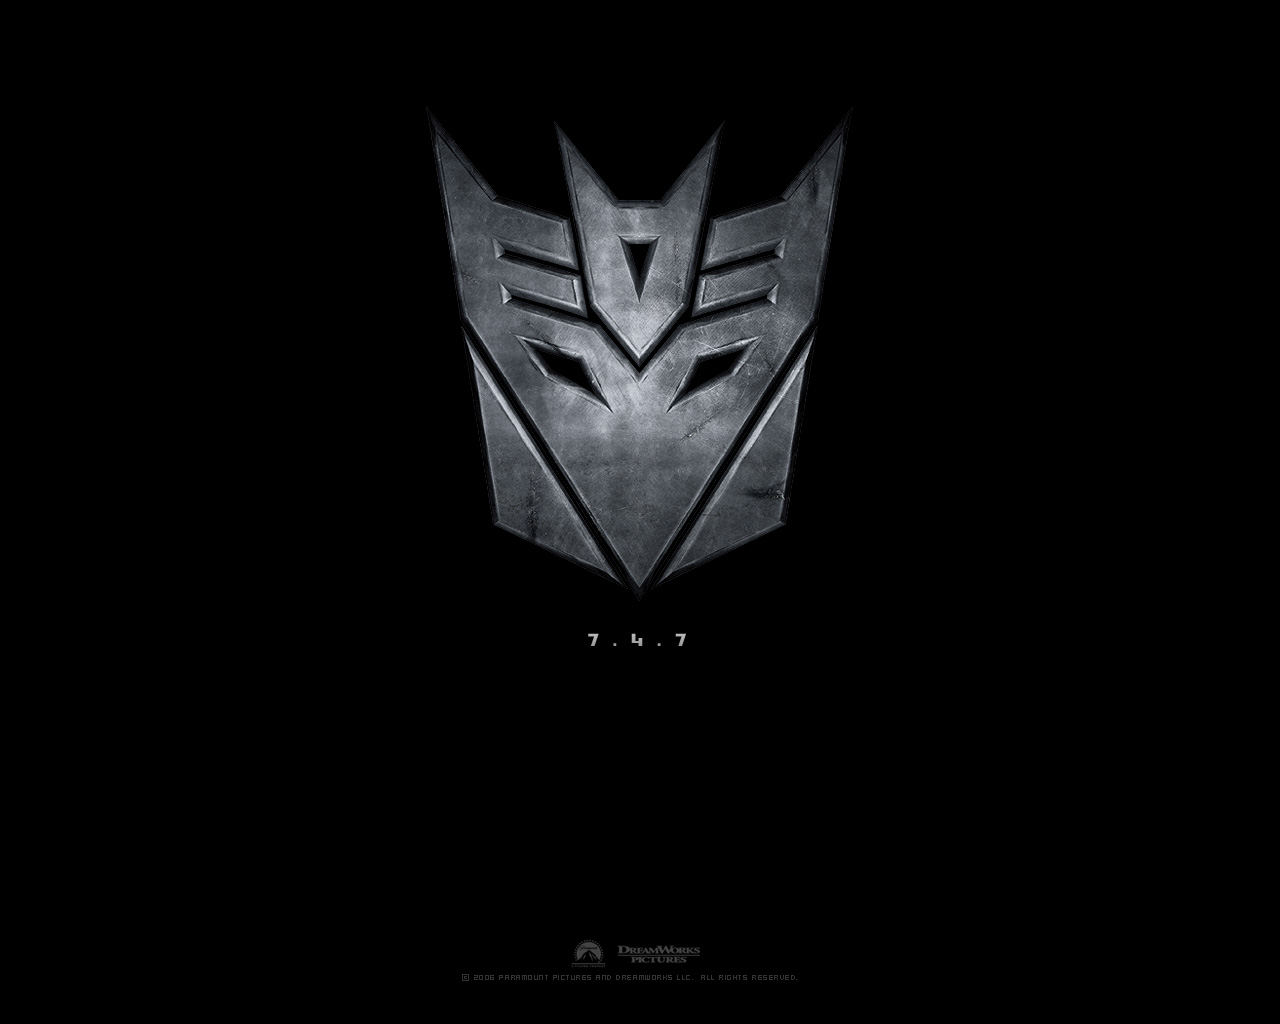 Download High quality Transformers wallpaper / Movies / 1280x1024